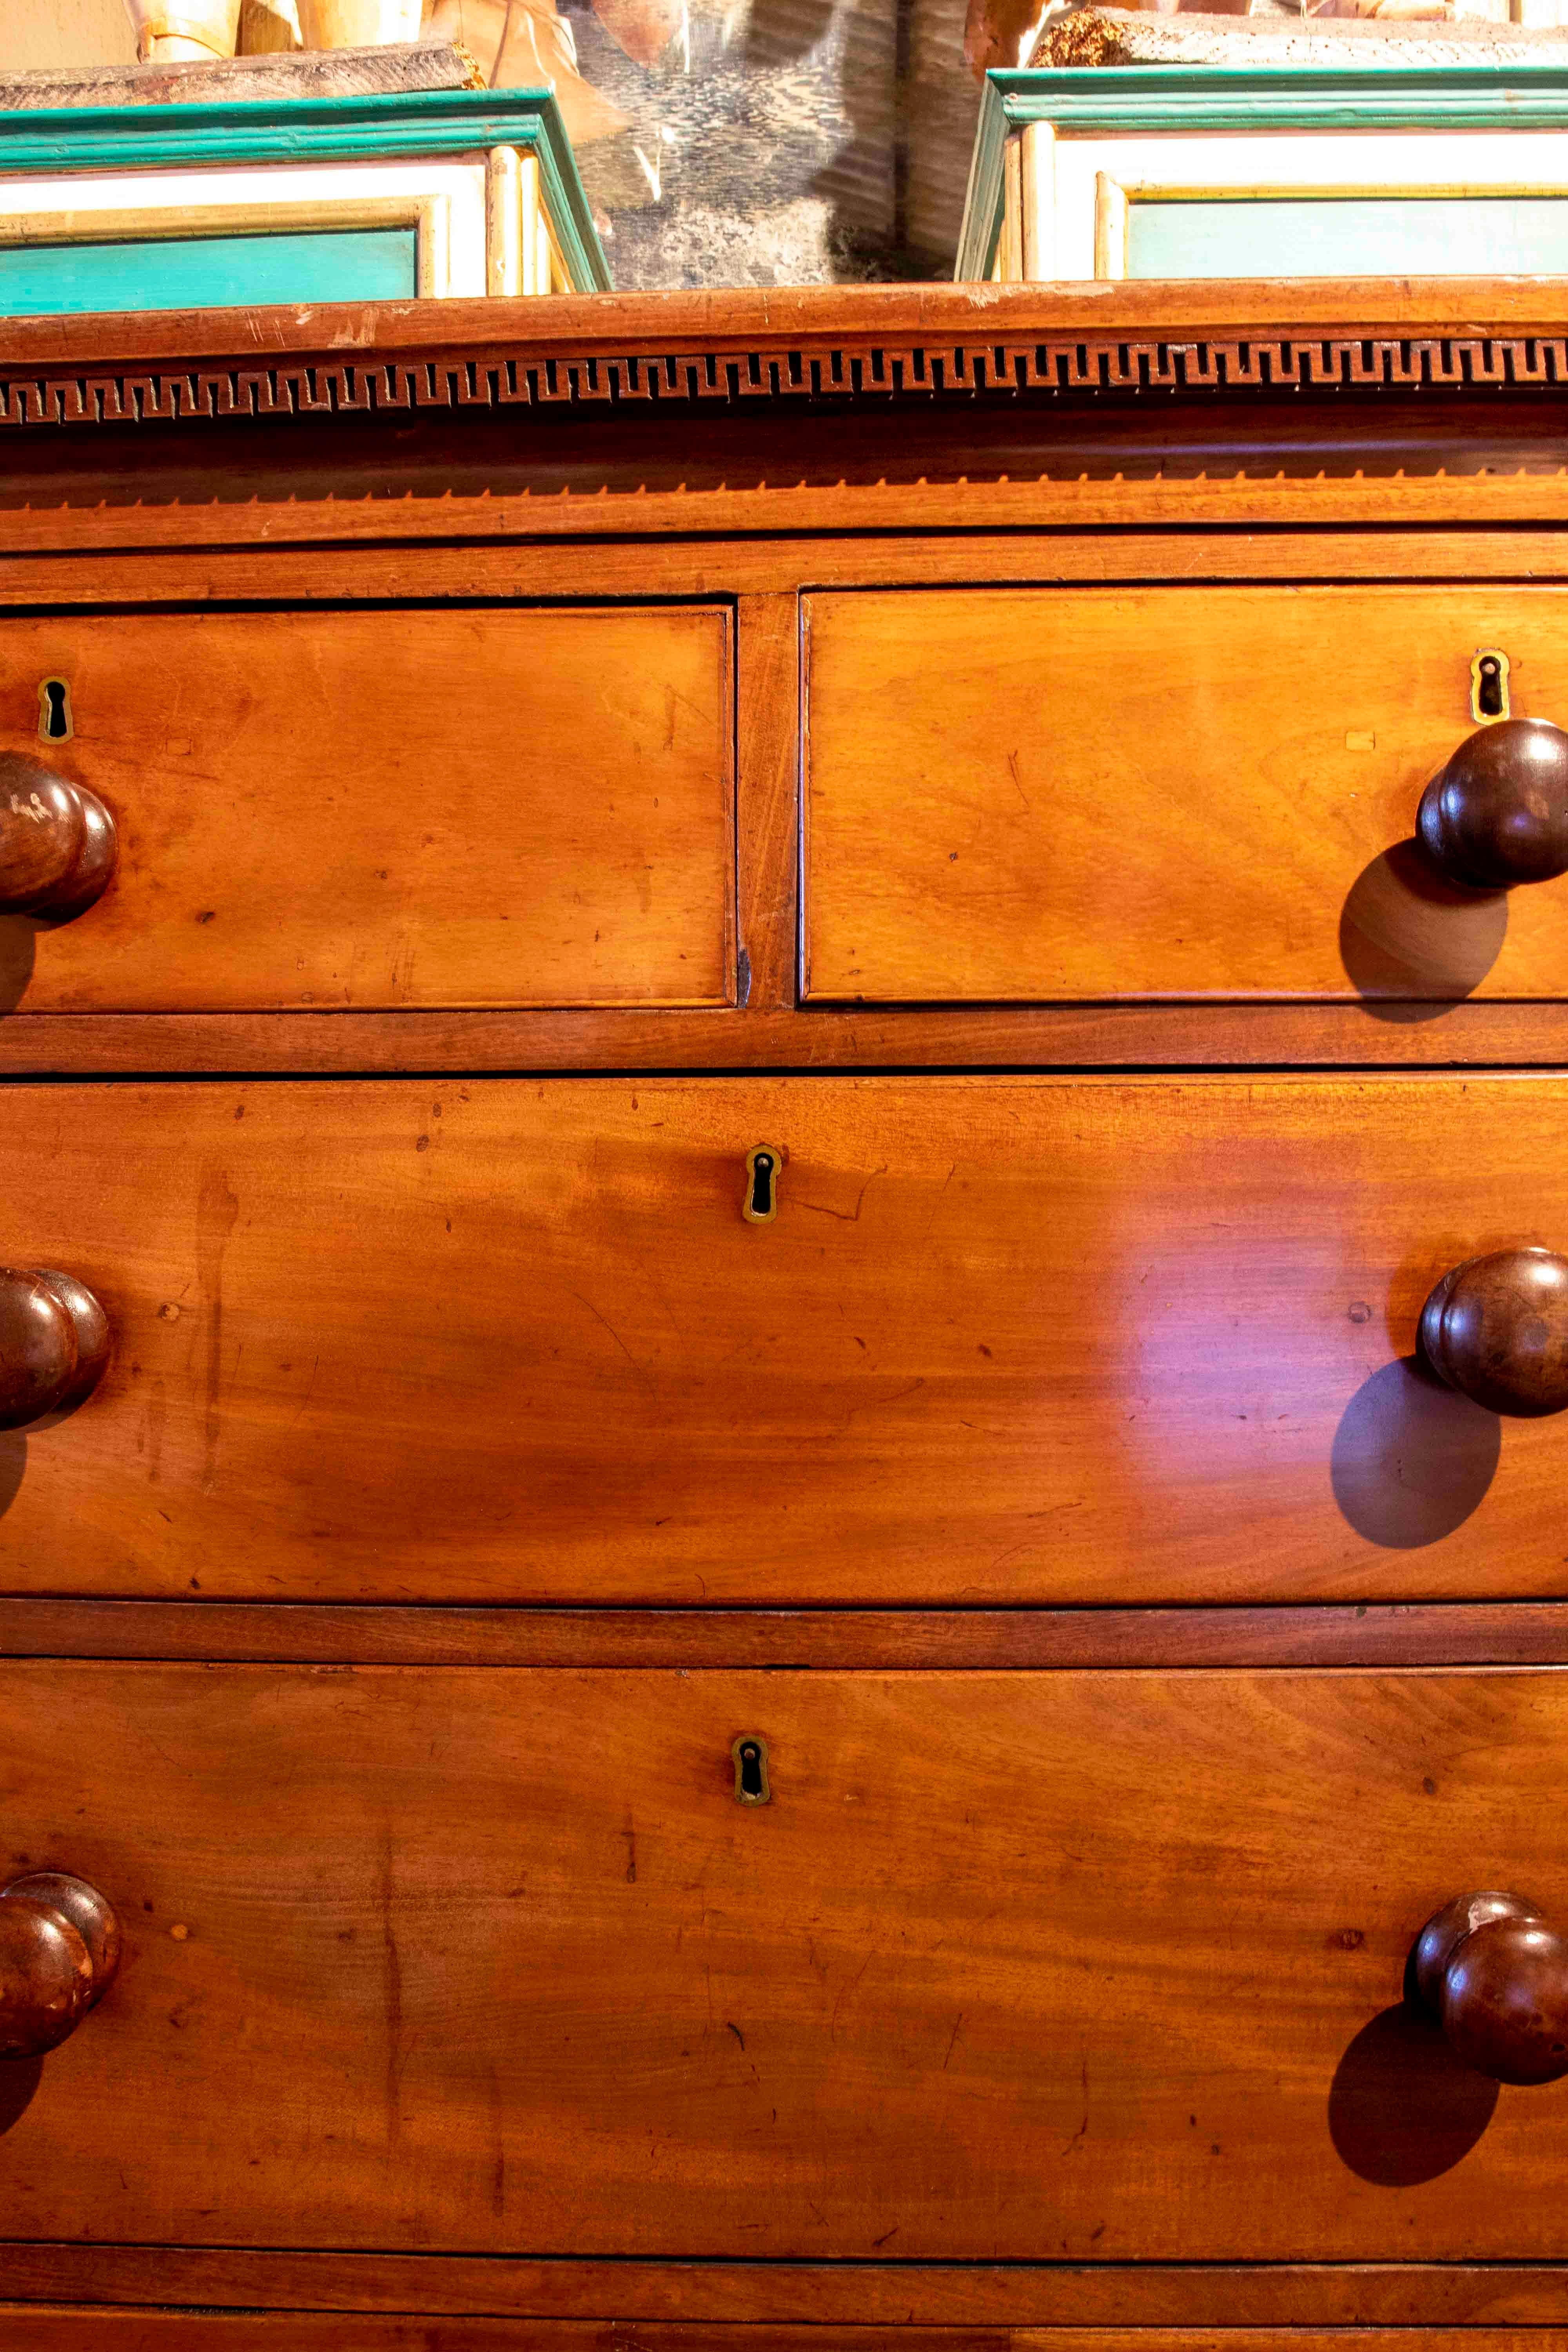 19th Century Chest of Drawers - English Mahogany Two-body Desk For Sale 3